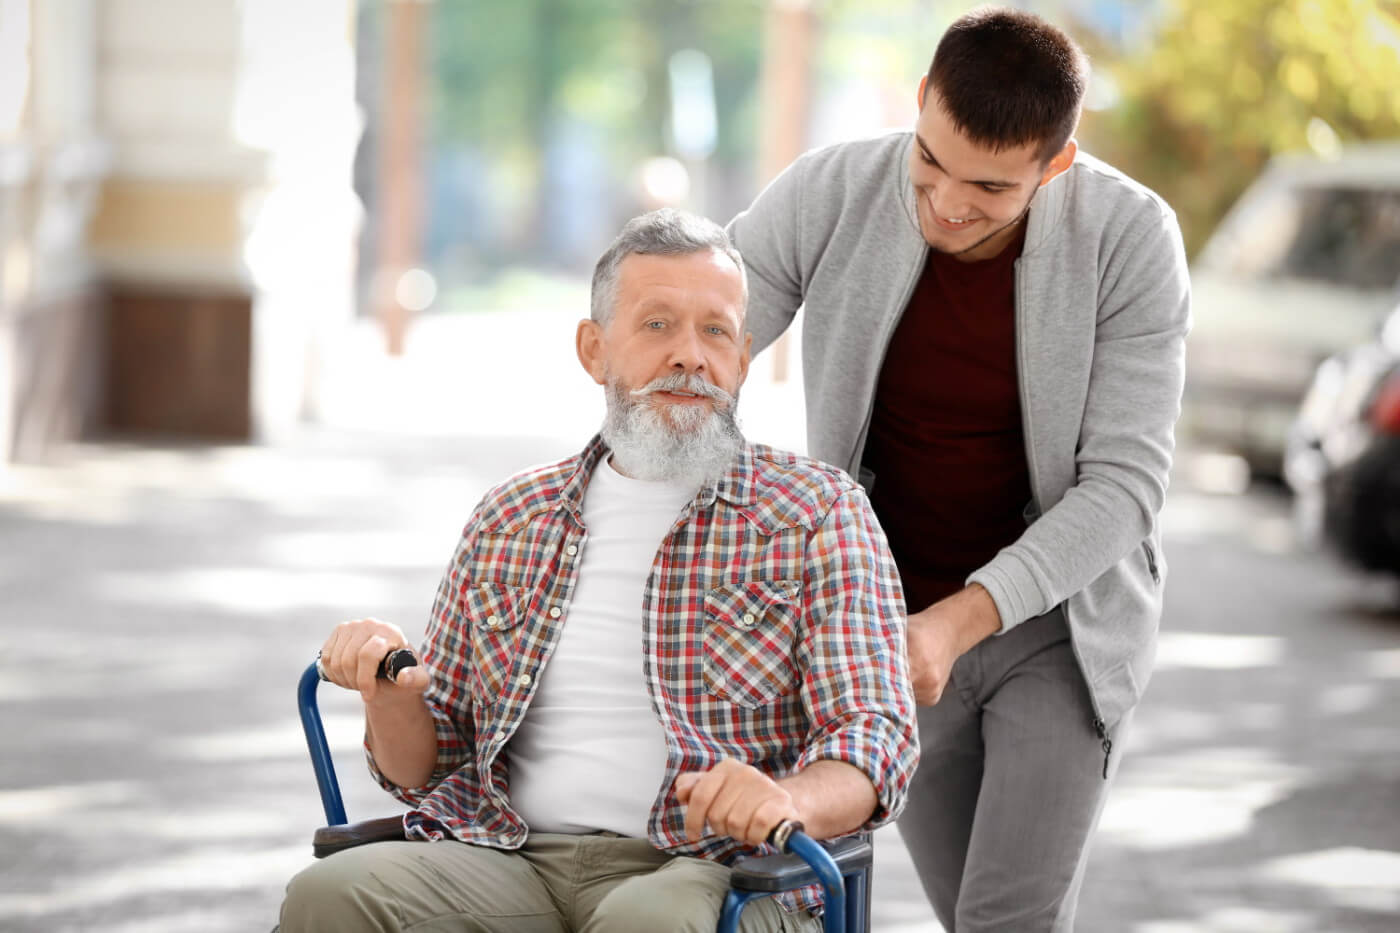 How to be a great caregiver - The 4 essential qualities